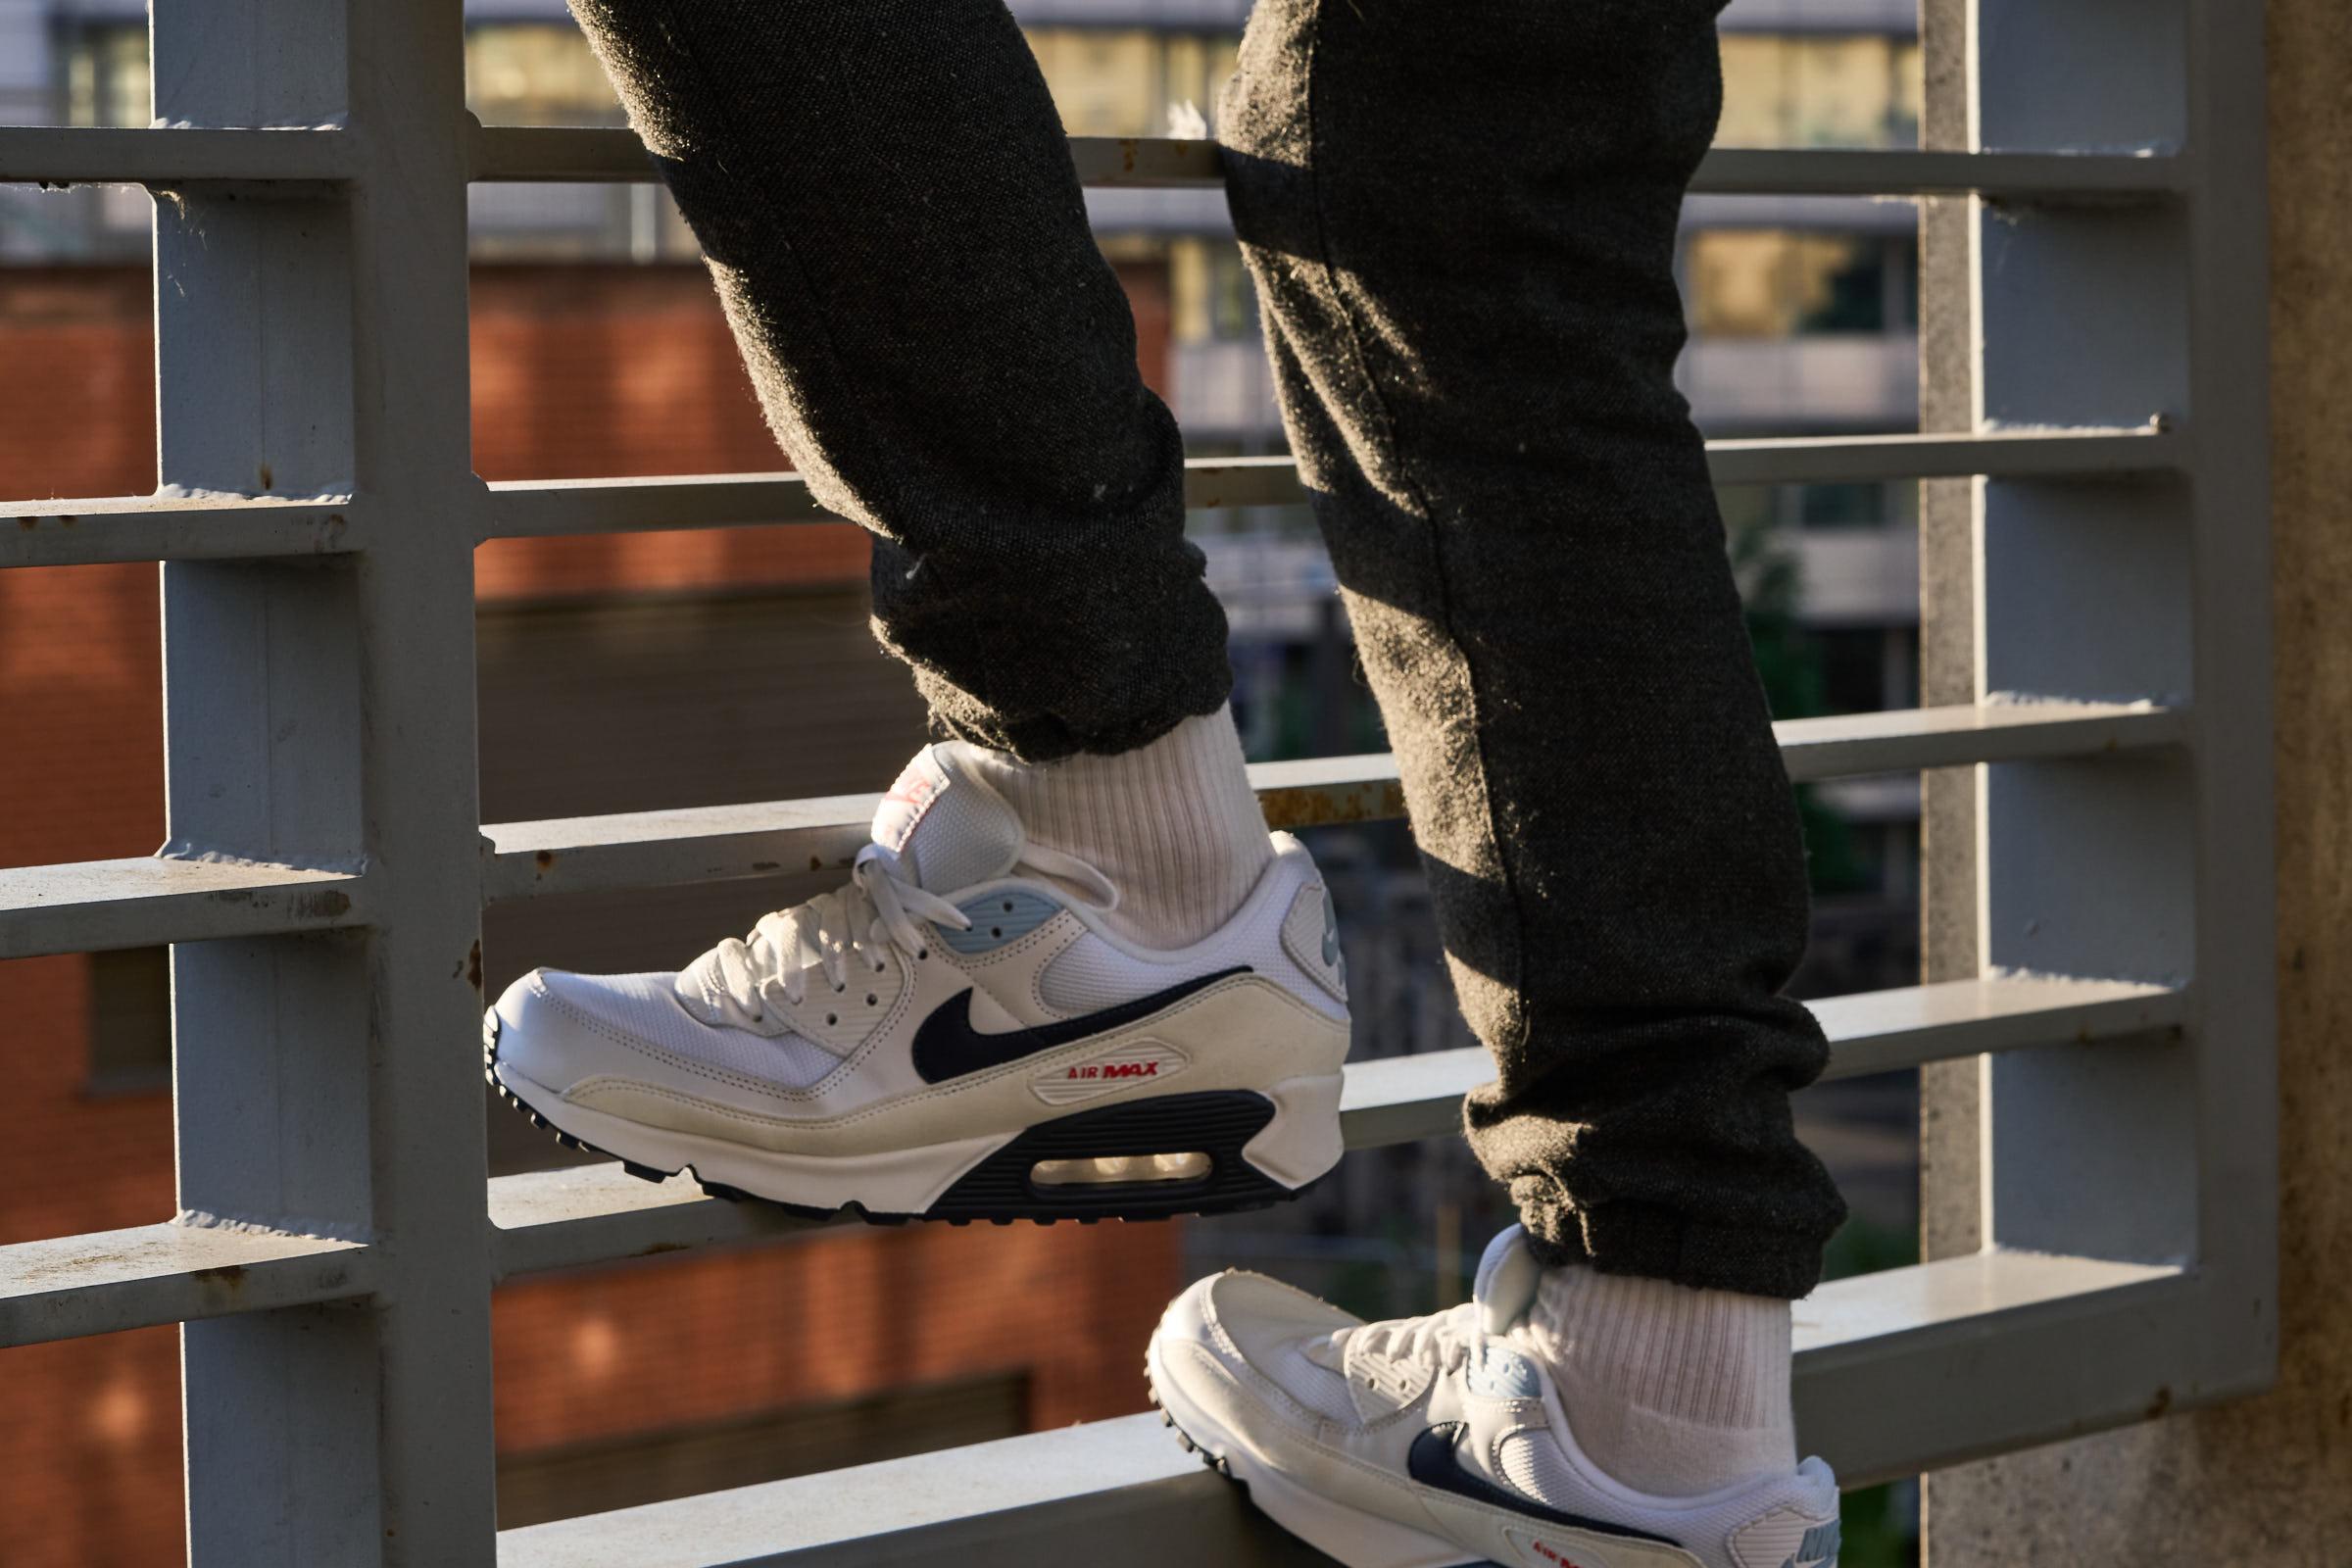 silver grey mens purple Review, shoes Comparison, 2020 shoes running | nike nike Facts, and HealthdesignShops lunarglide sale